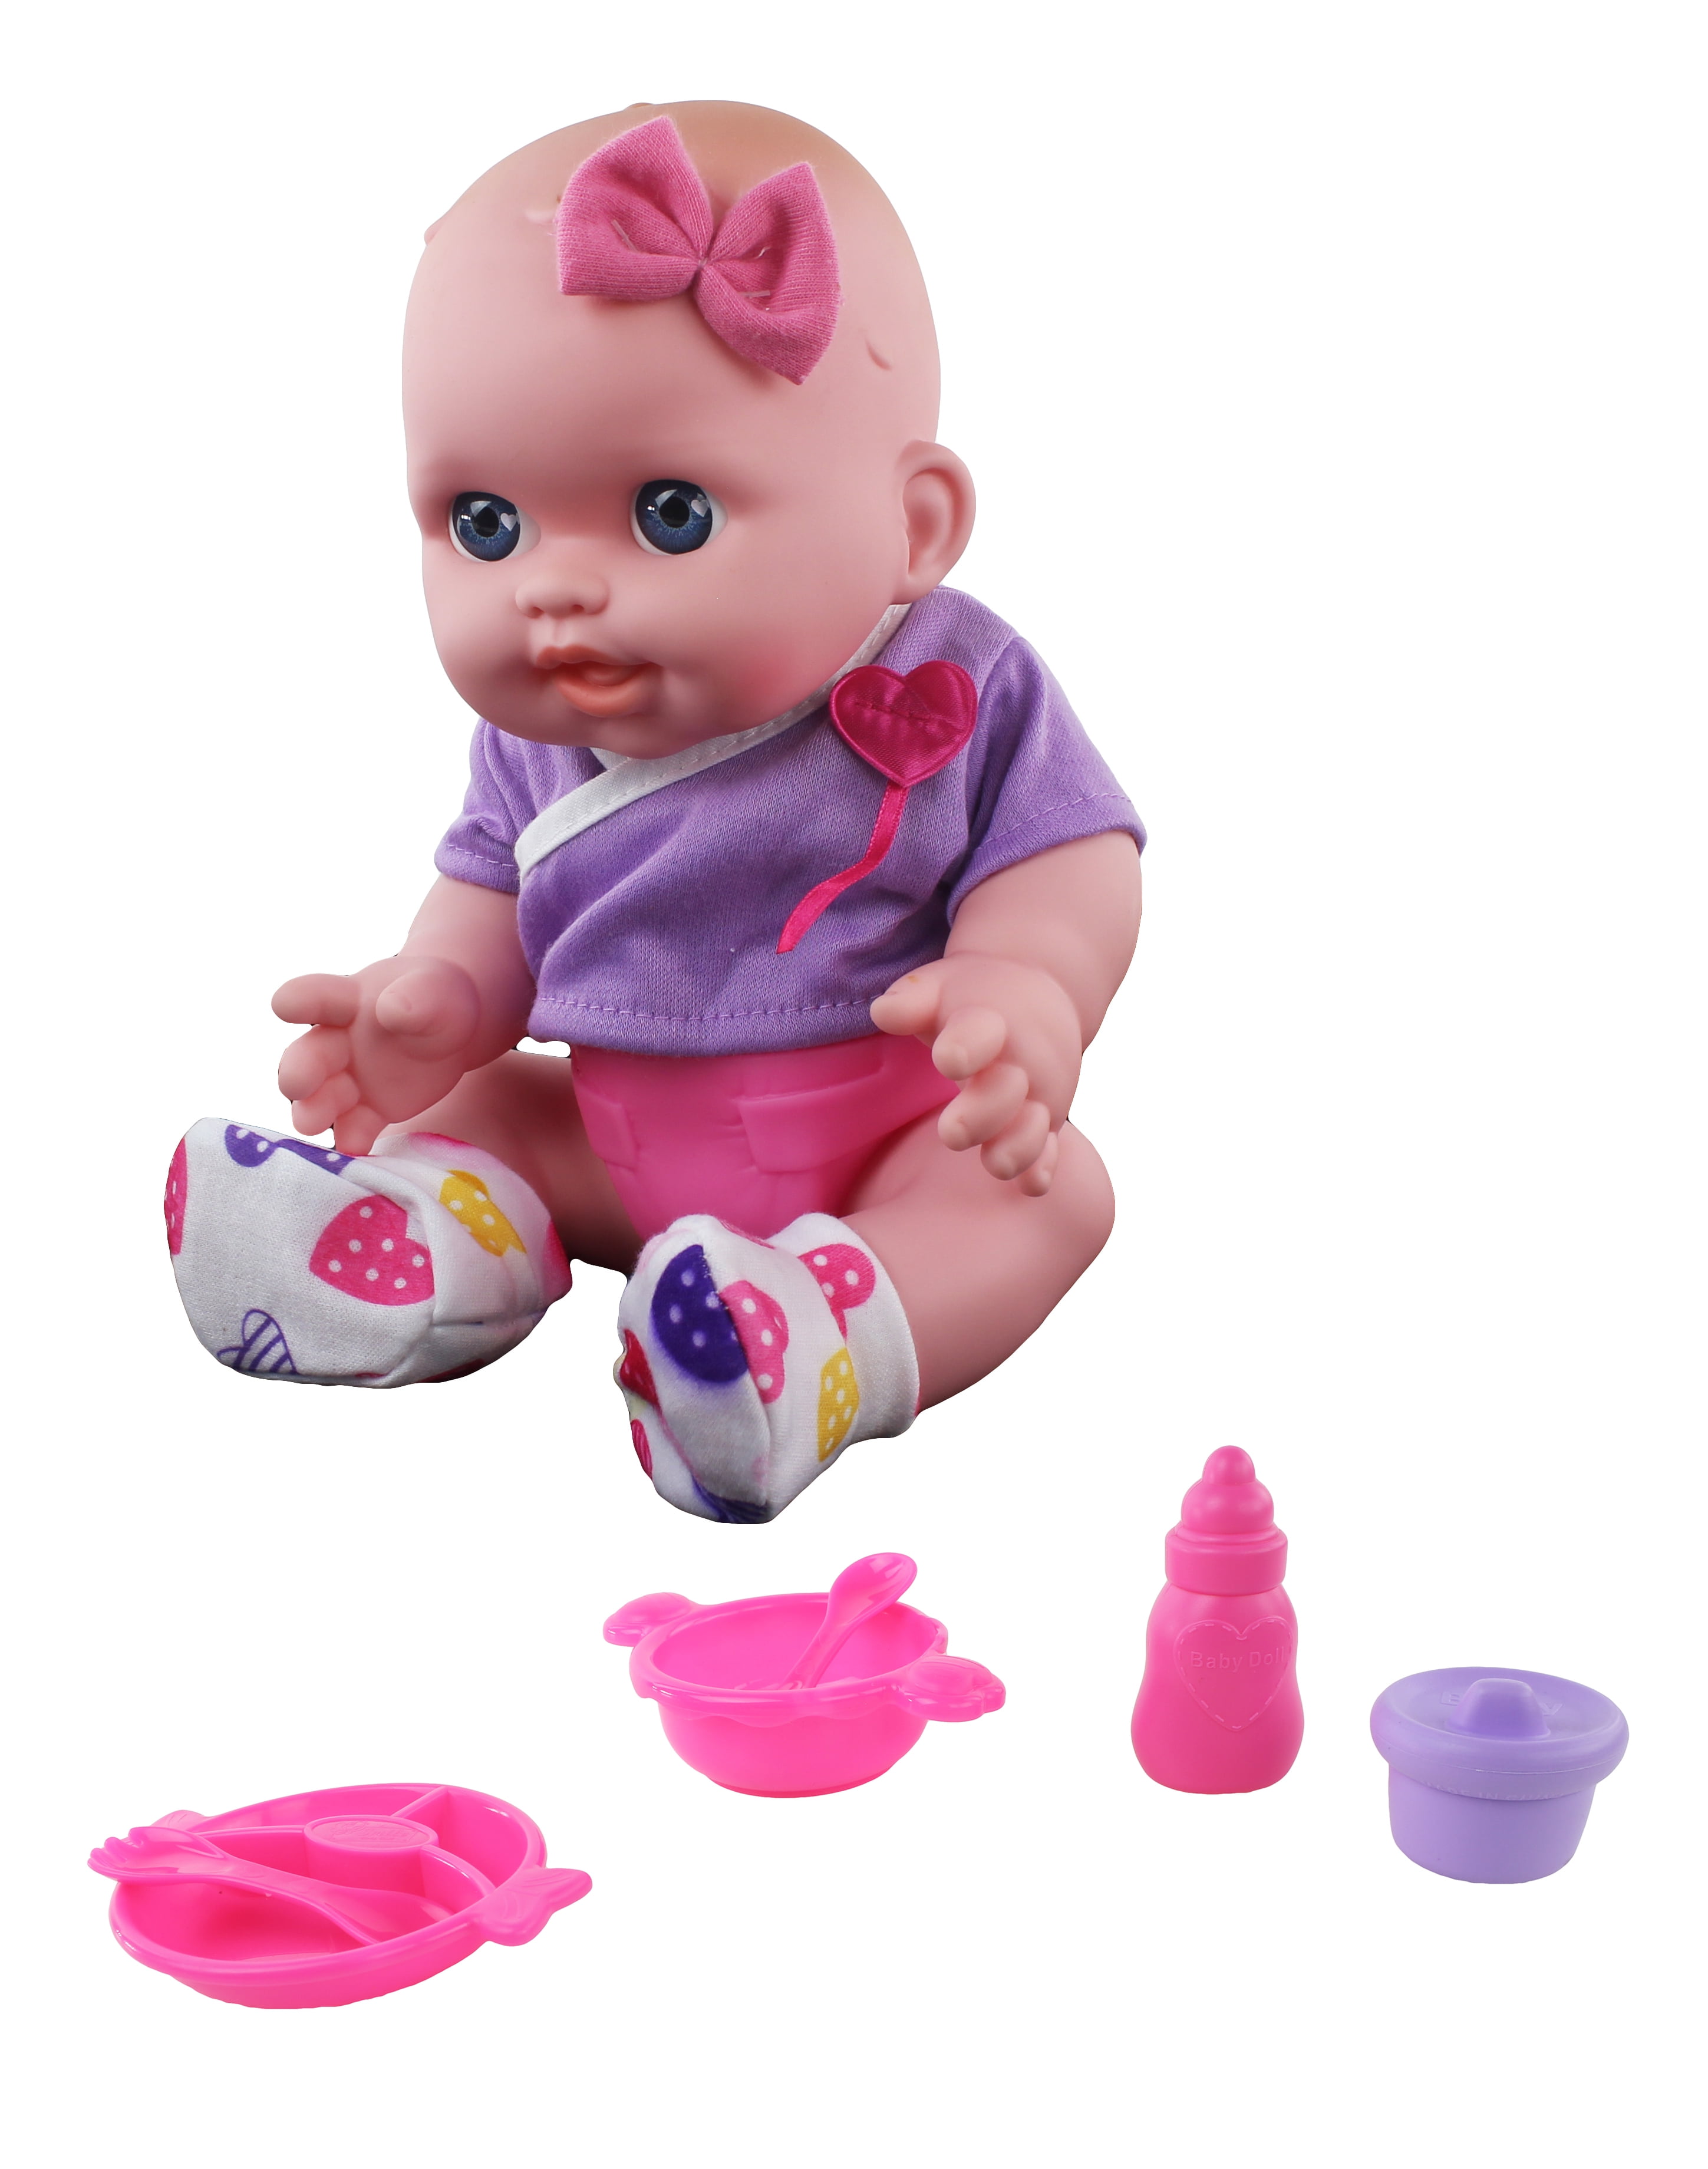 Super Cute Adorable Baby Doll Toy with Cool Accessories, Soft Rubber